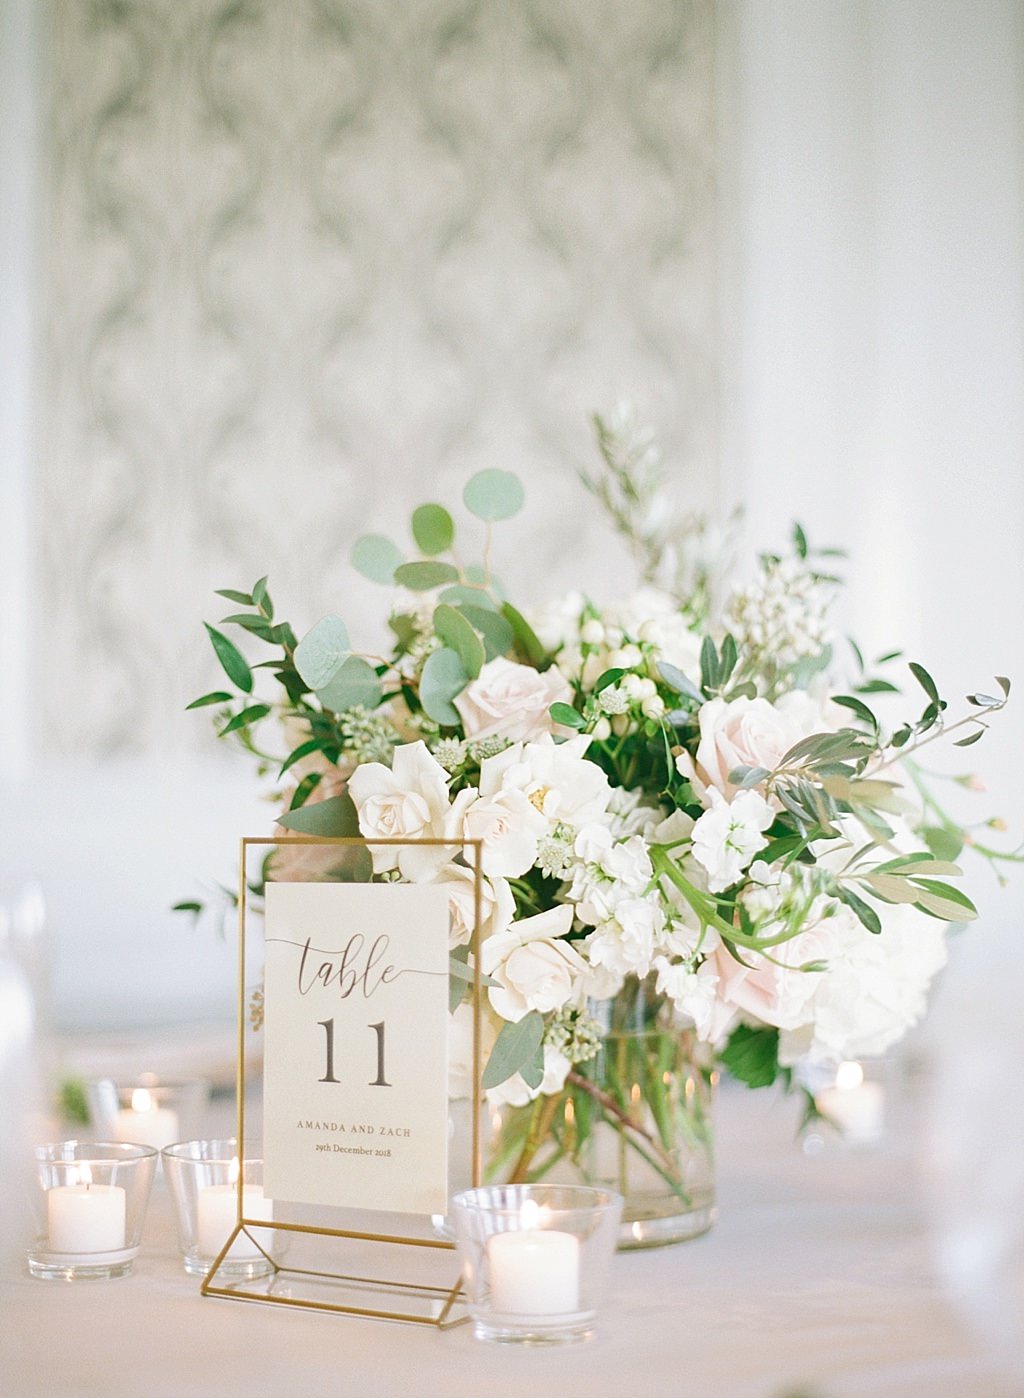 INSTAGRAM Formal Modern Classic Wedding Reception Decor, Gold Table Number Sign, White and Blush Pink Roses, Eucalyptus, and Greenery Floral Centerpiece